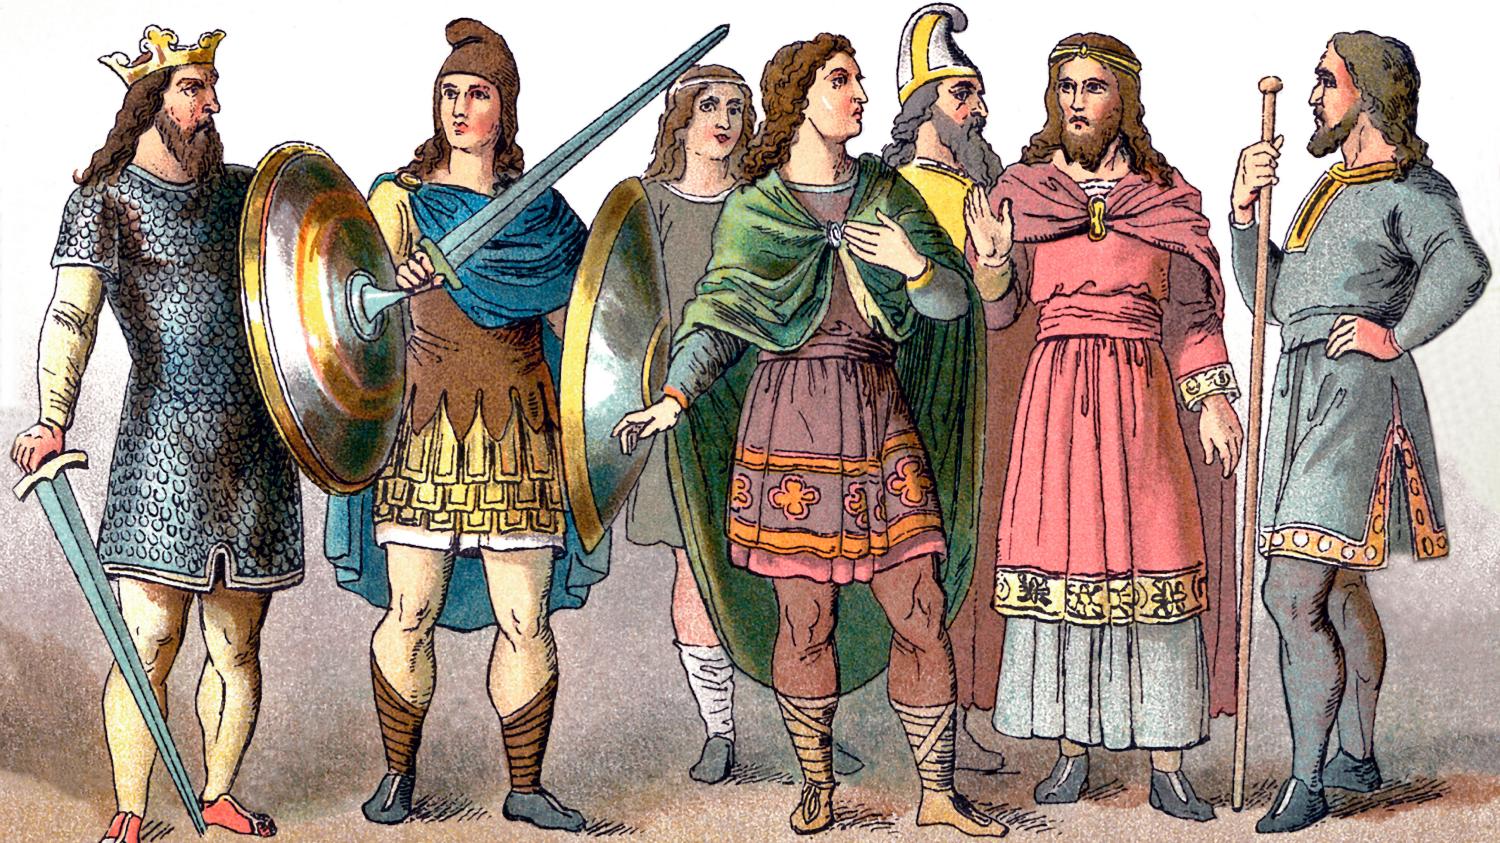 25 interesting facts about Anglo-Saxons